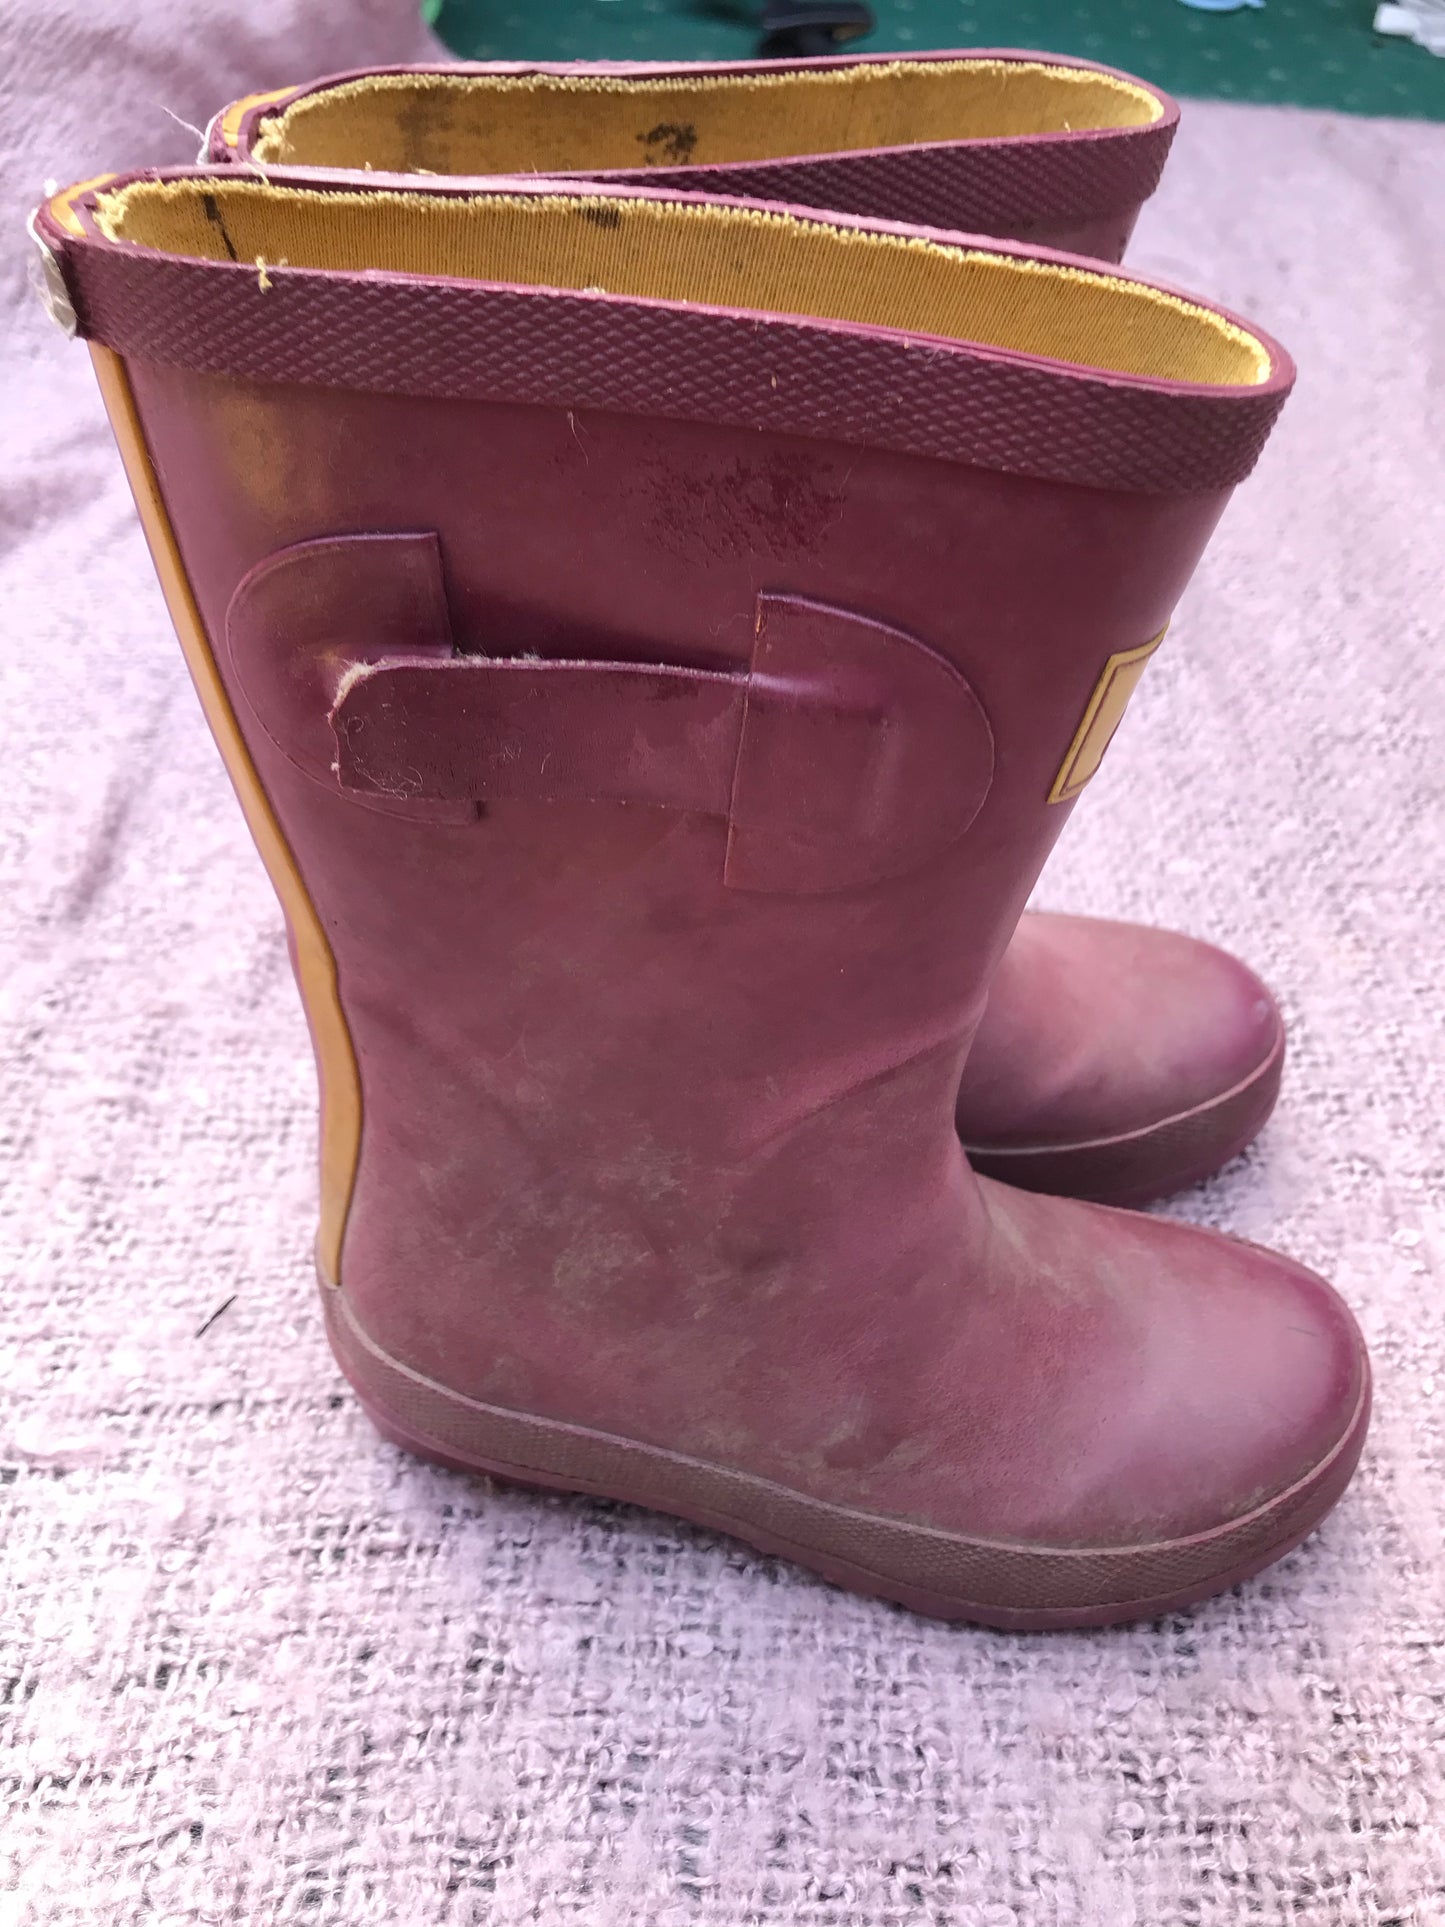 children’s joules purple wellies size 10 FREE POSTAGE *